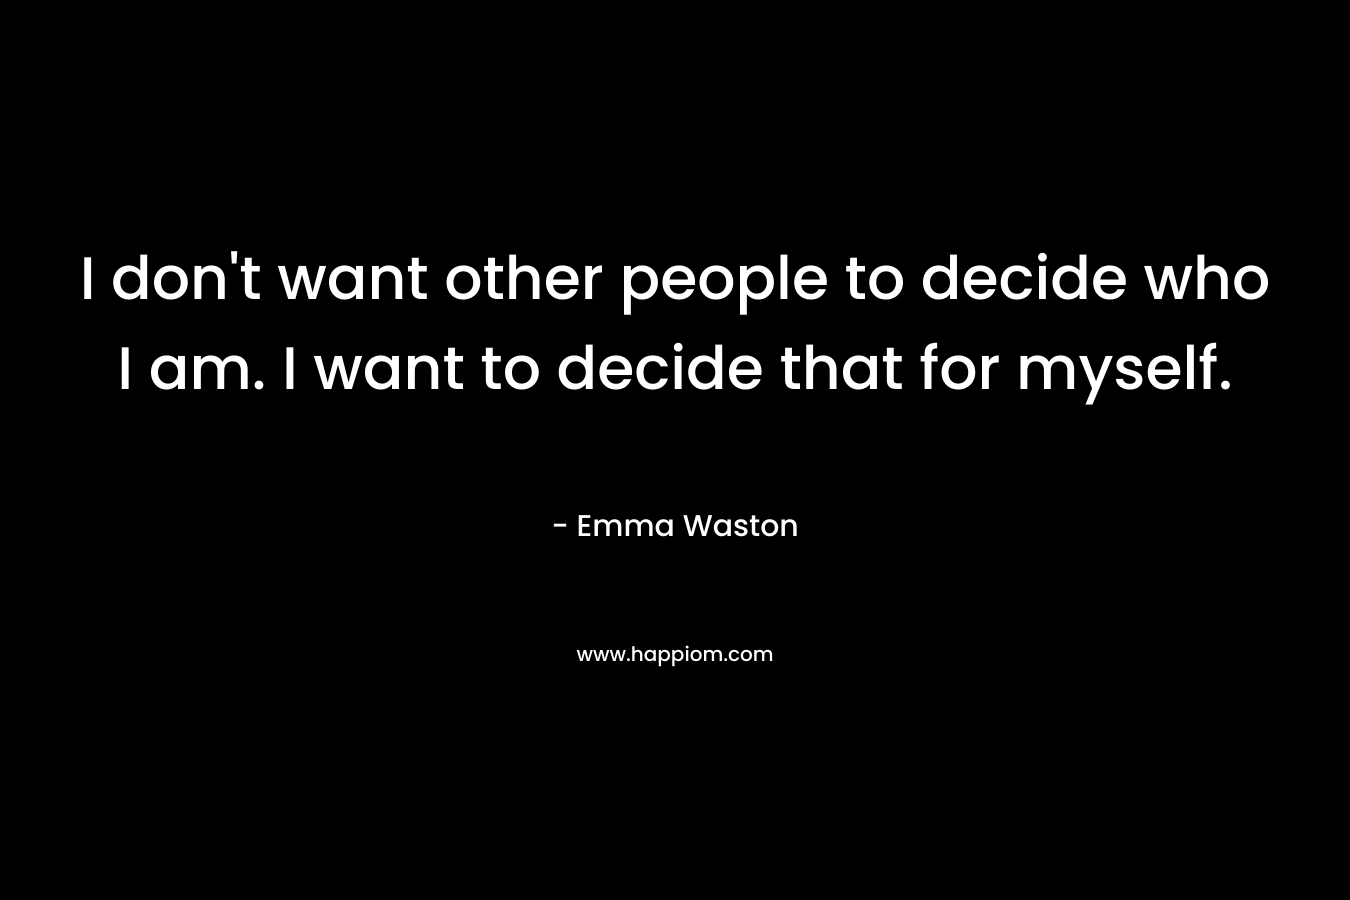 I don’t want other people to decide who I am. I want to decide that for myself. – Emma Waston